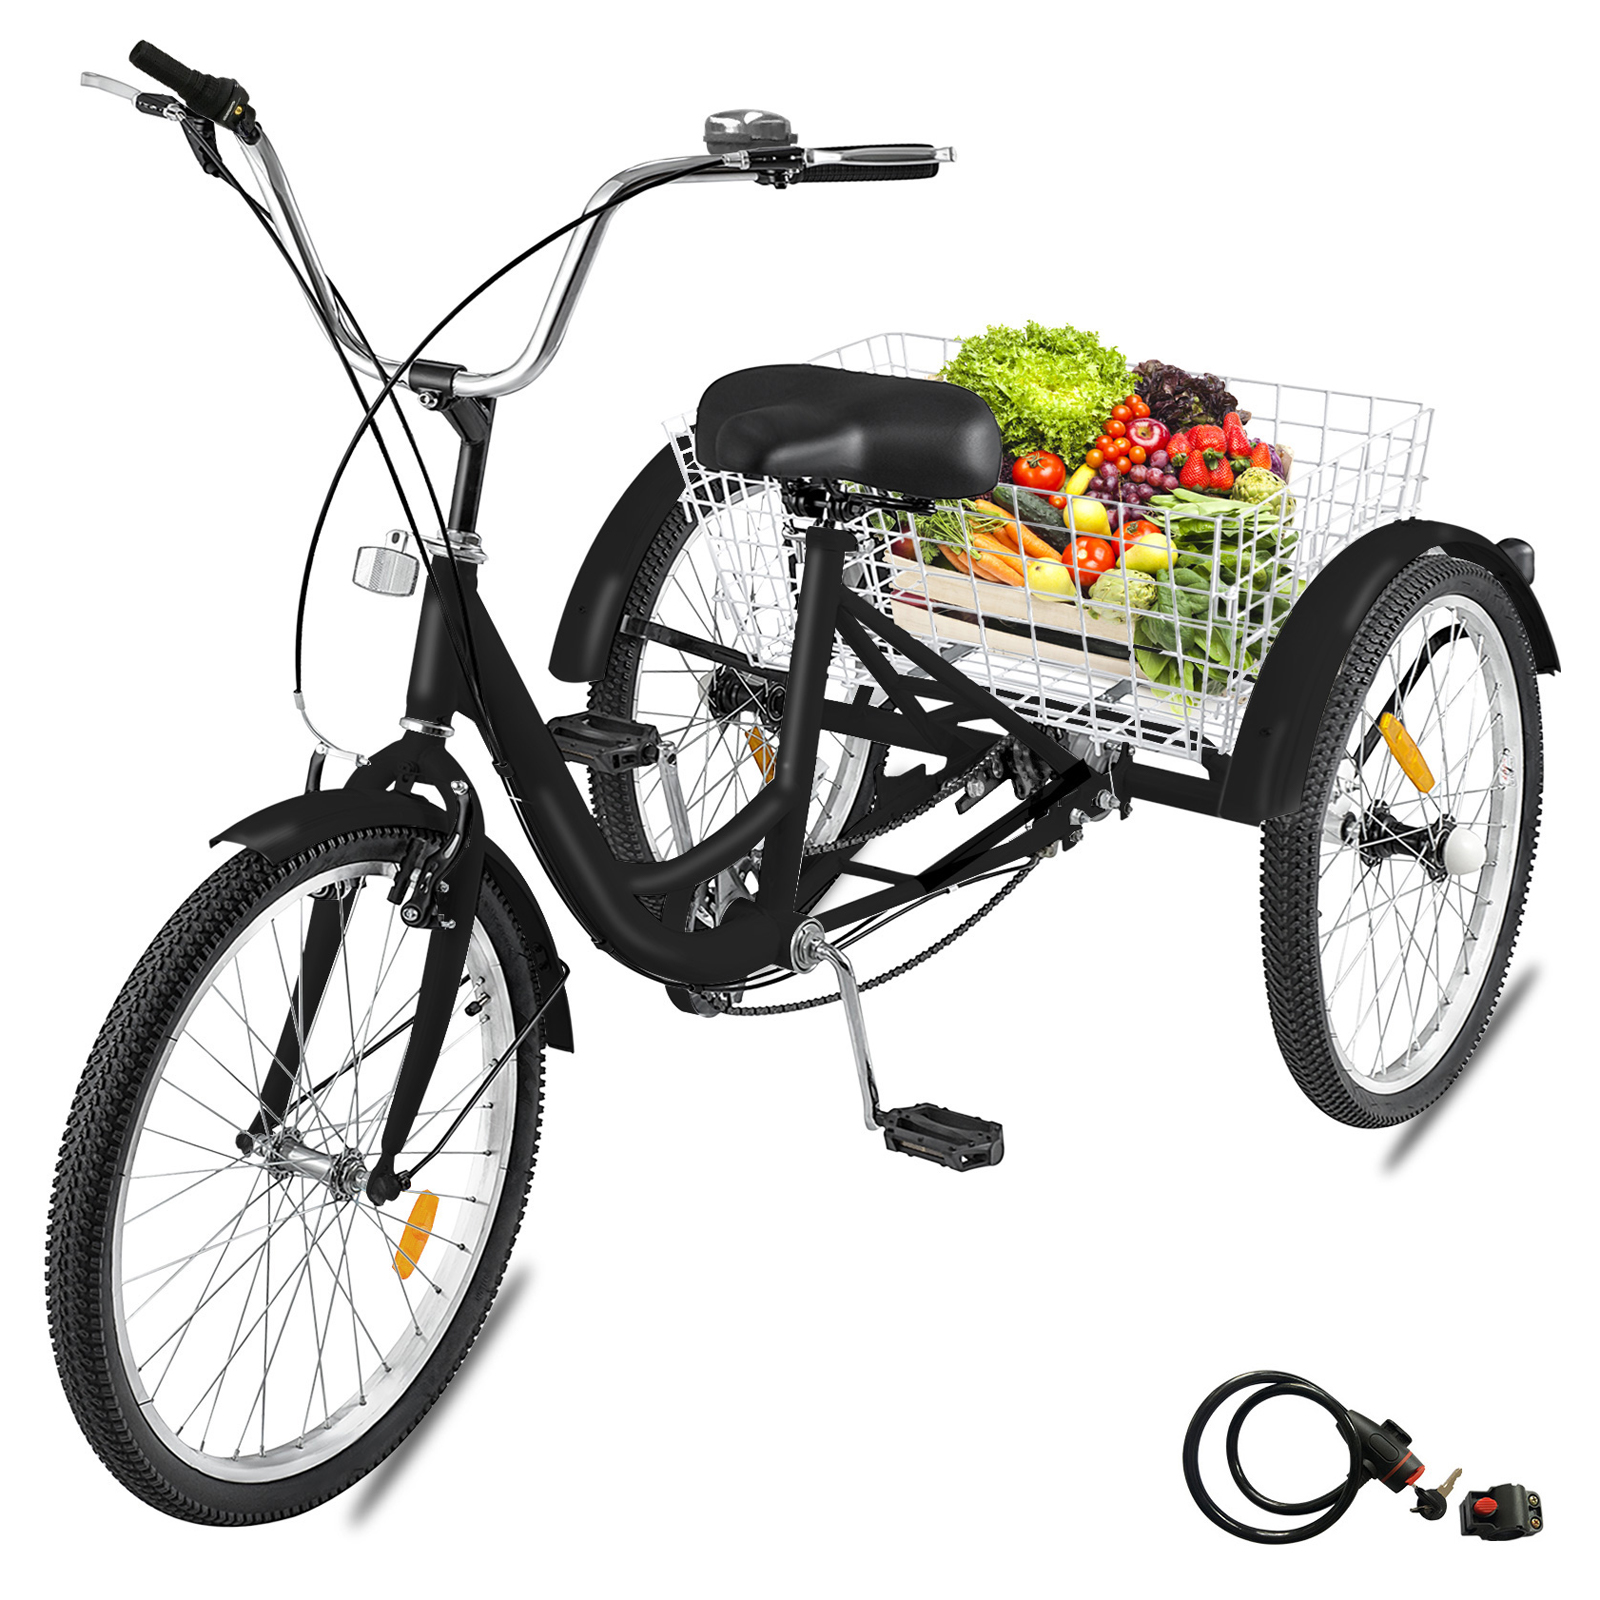 Adult Tricycle 24" 7-Speeds Trike 3-Wheel Bicycle w/ Basket & Lock for Shopping от Vevor Many GEOs